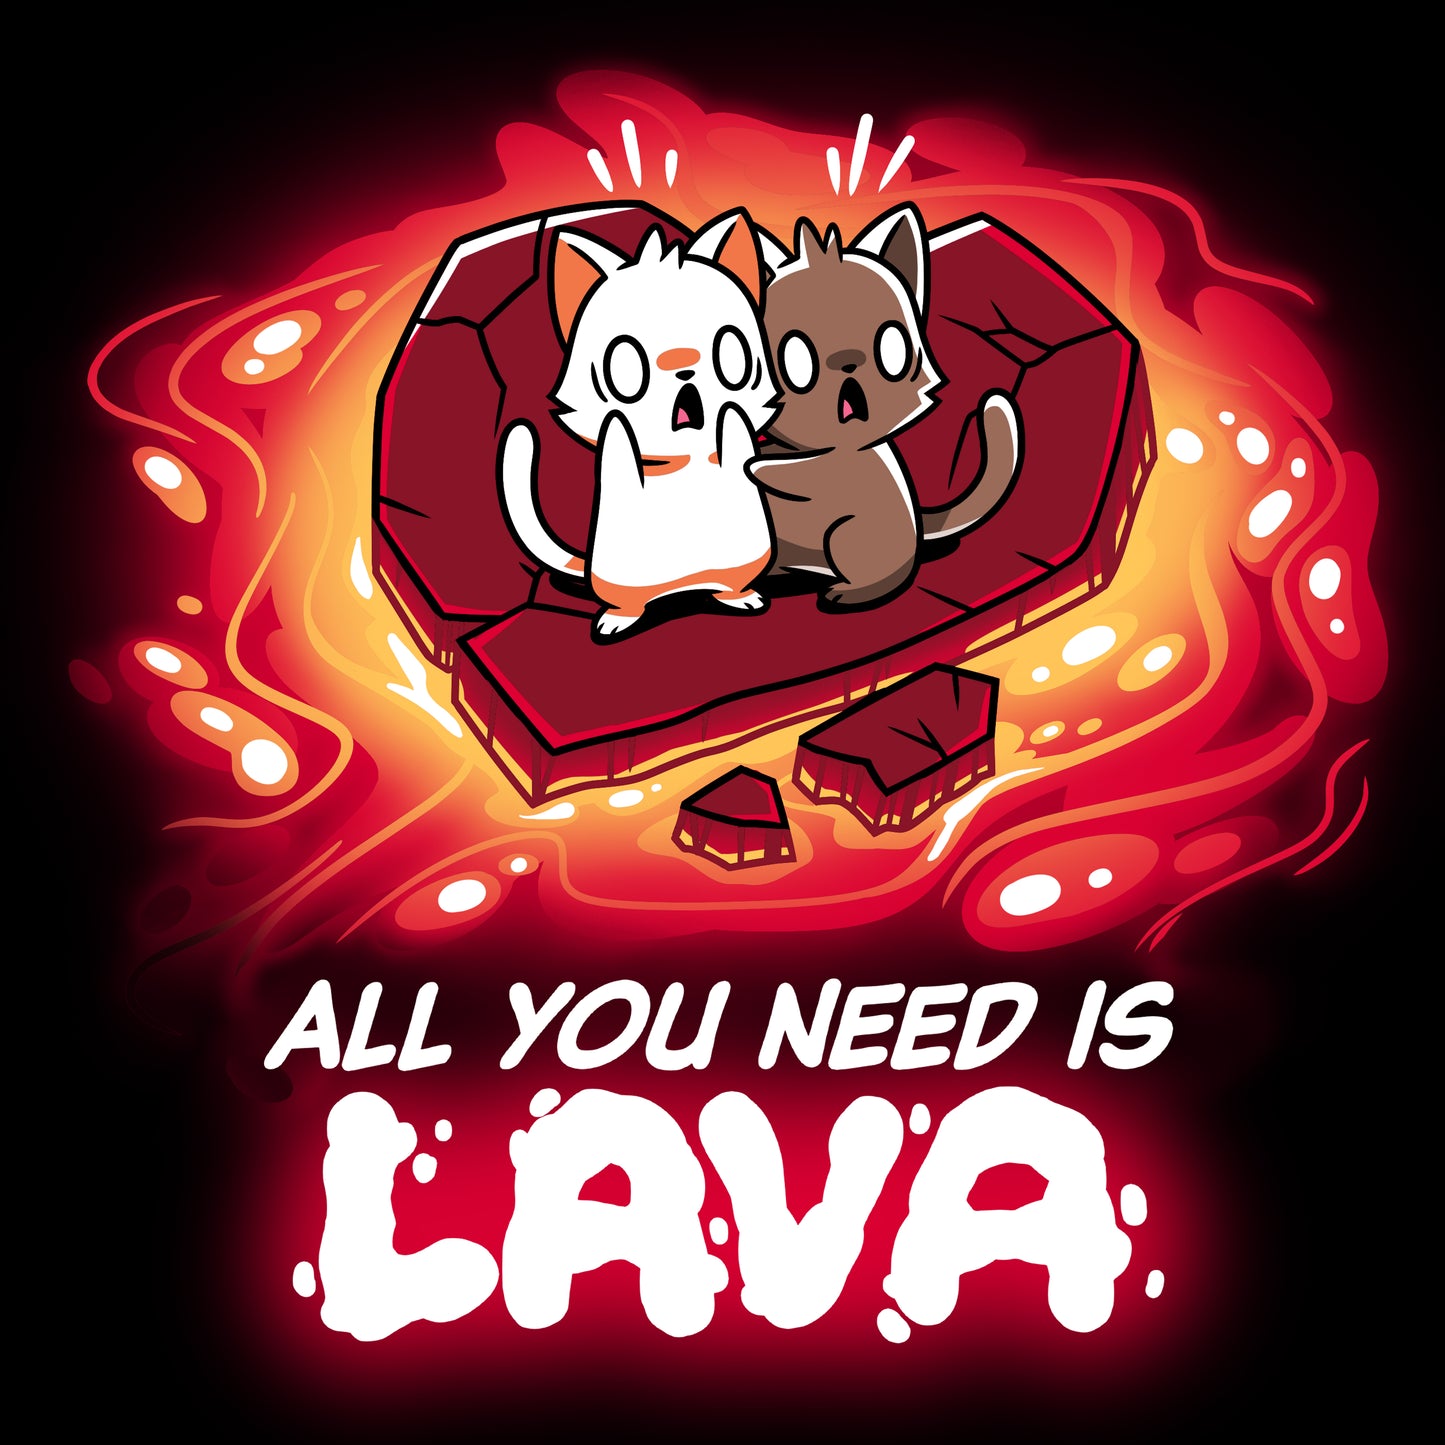 Get ready to rock your style with TeeTurtle's All You Need is Lava T-shirt. With its bold and fiery design, this shirt is all you need to make a statement. The striking lava pattern adds a touch of